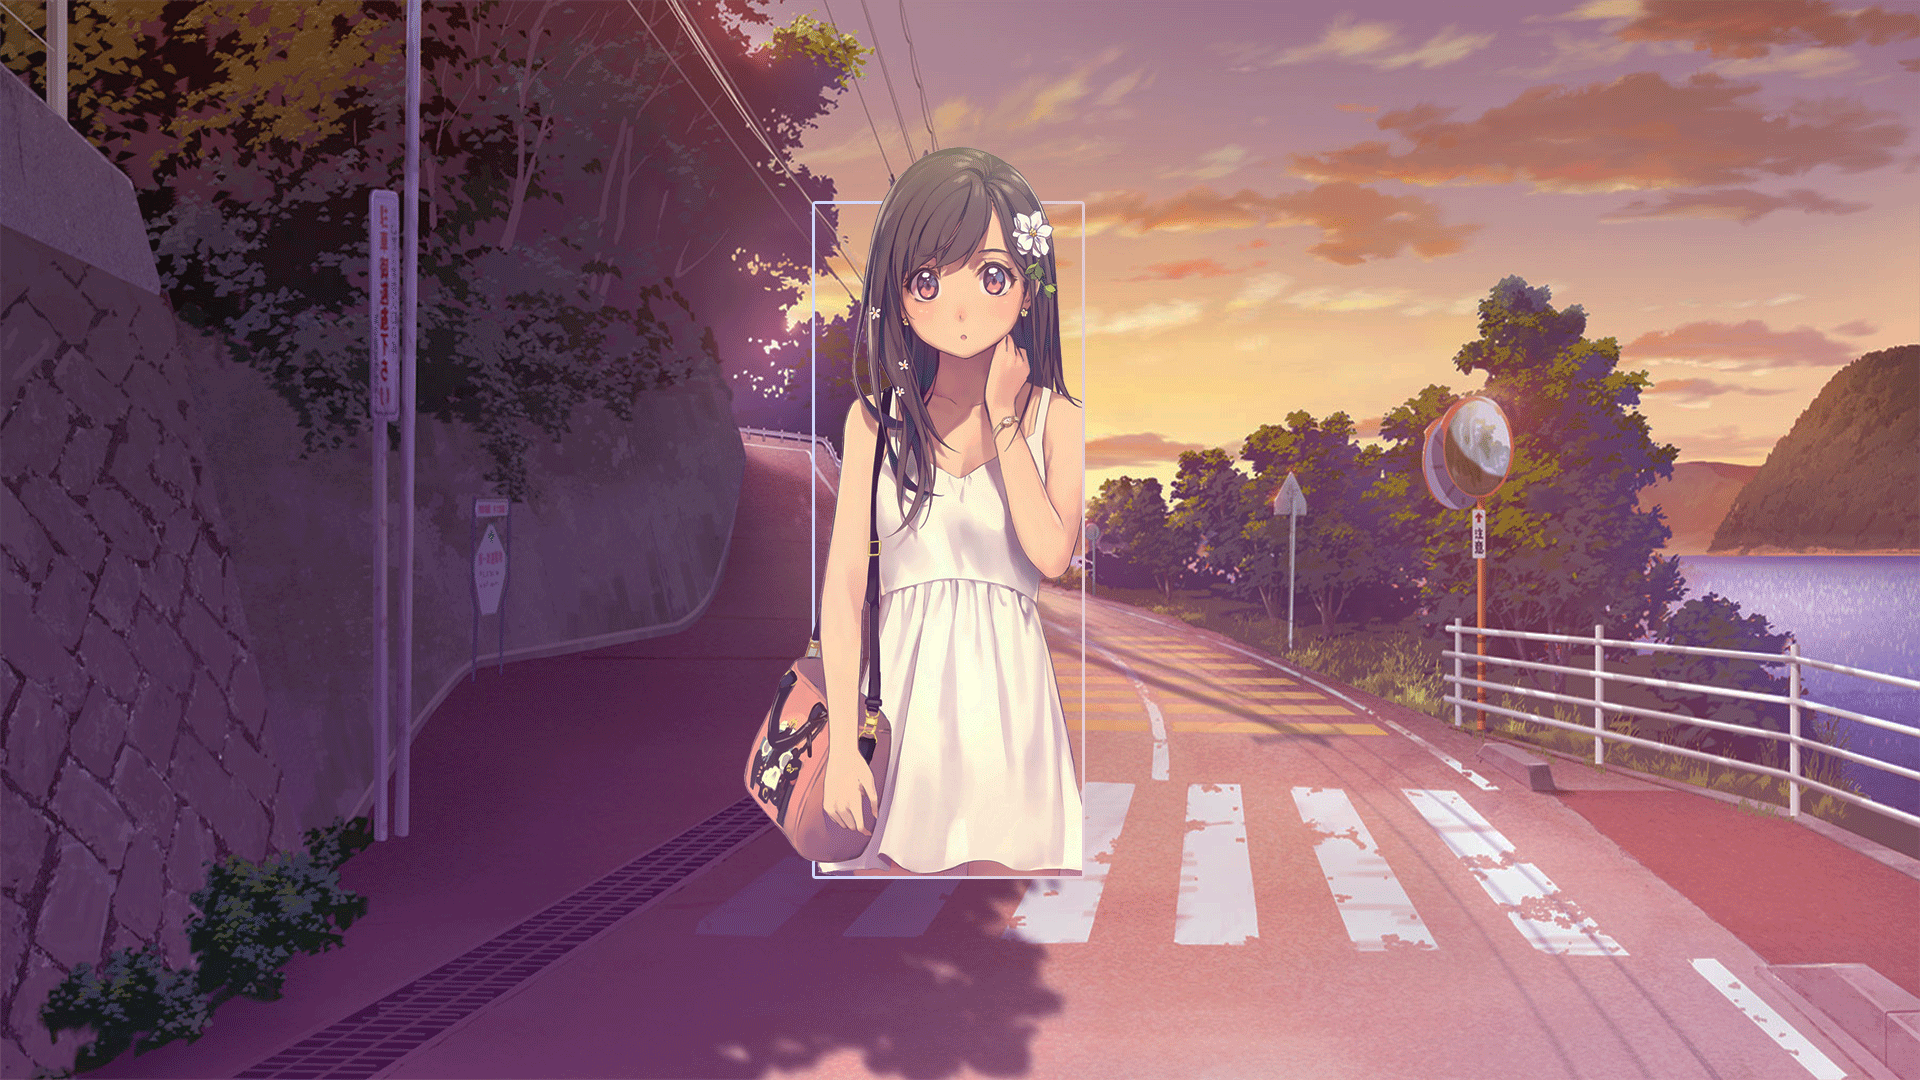 Anime Anime Girls Street Afternoon Road Photoshop Digital Art Picture In Picture Anime Landscape Tre 1920x1080